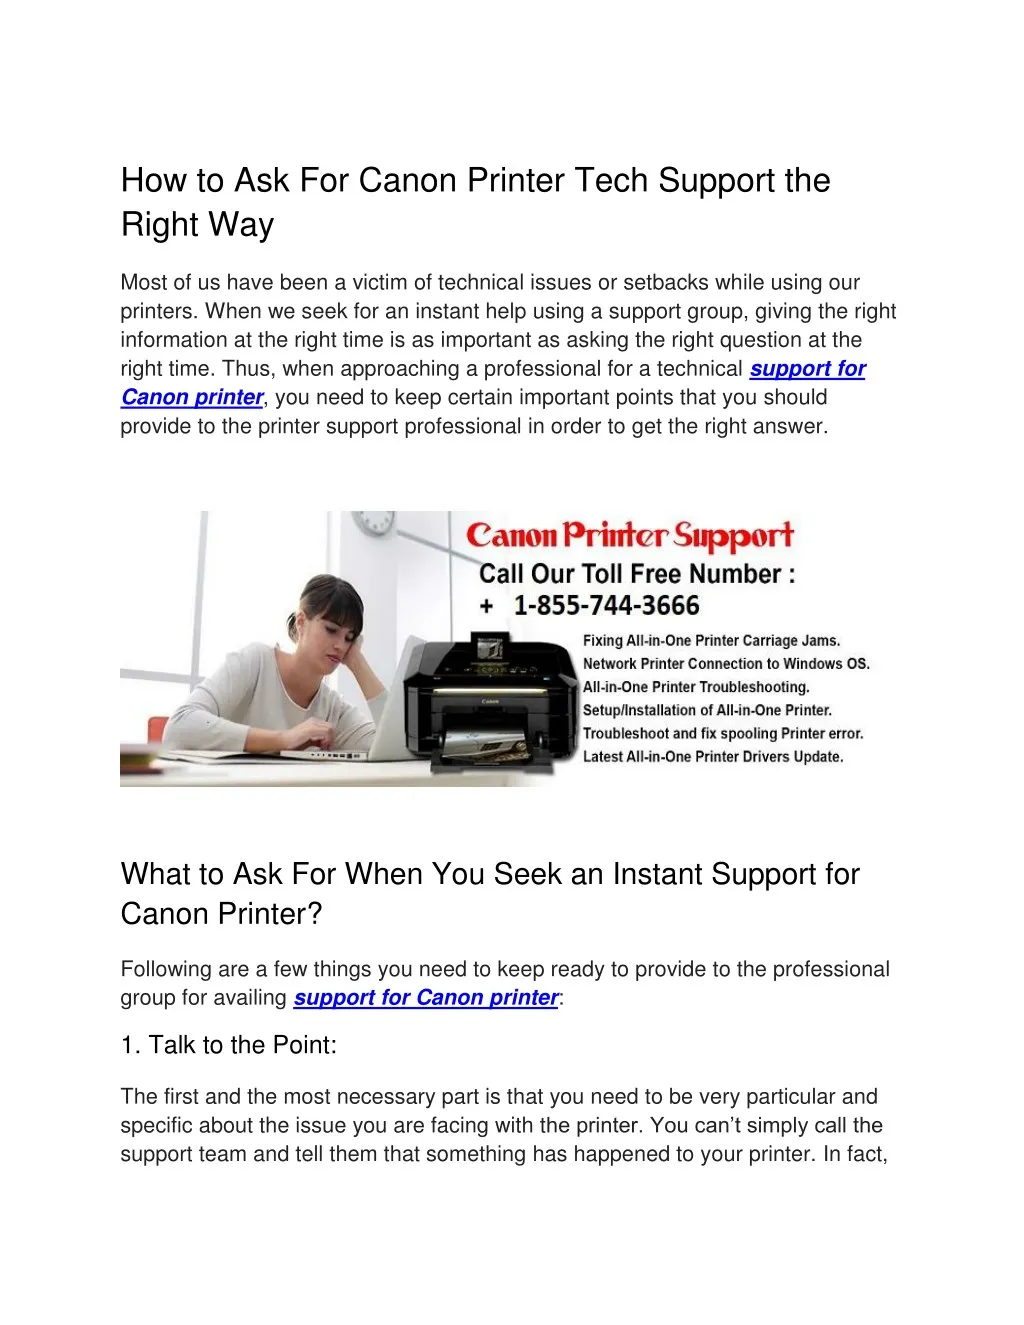 how to ask for canon printer tech support